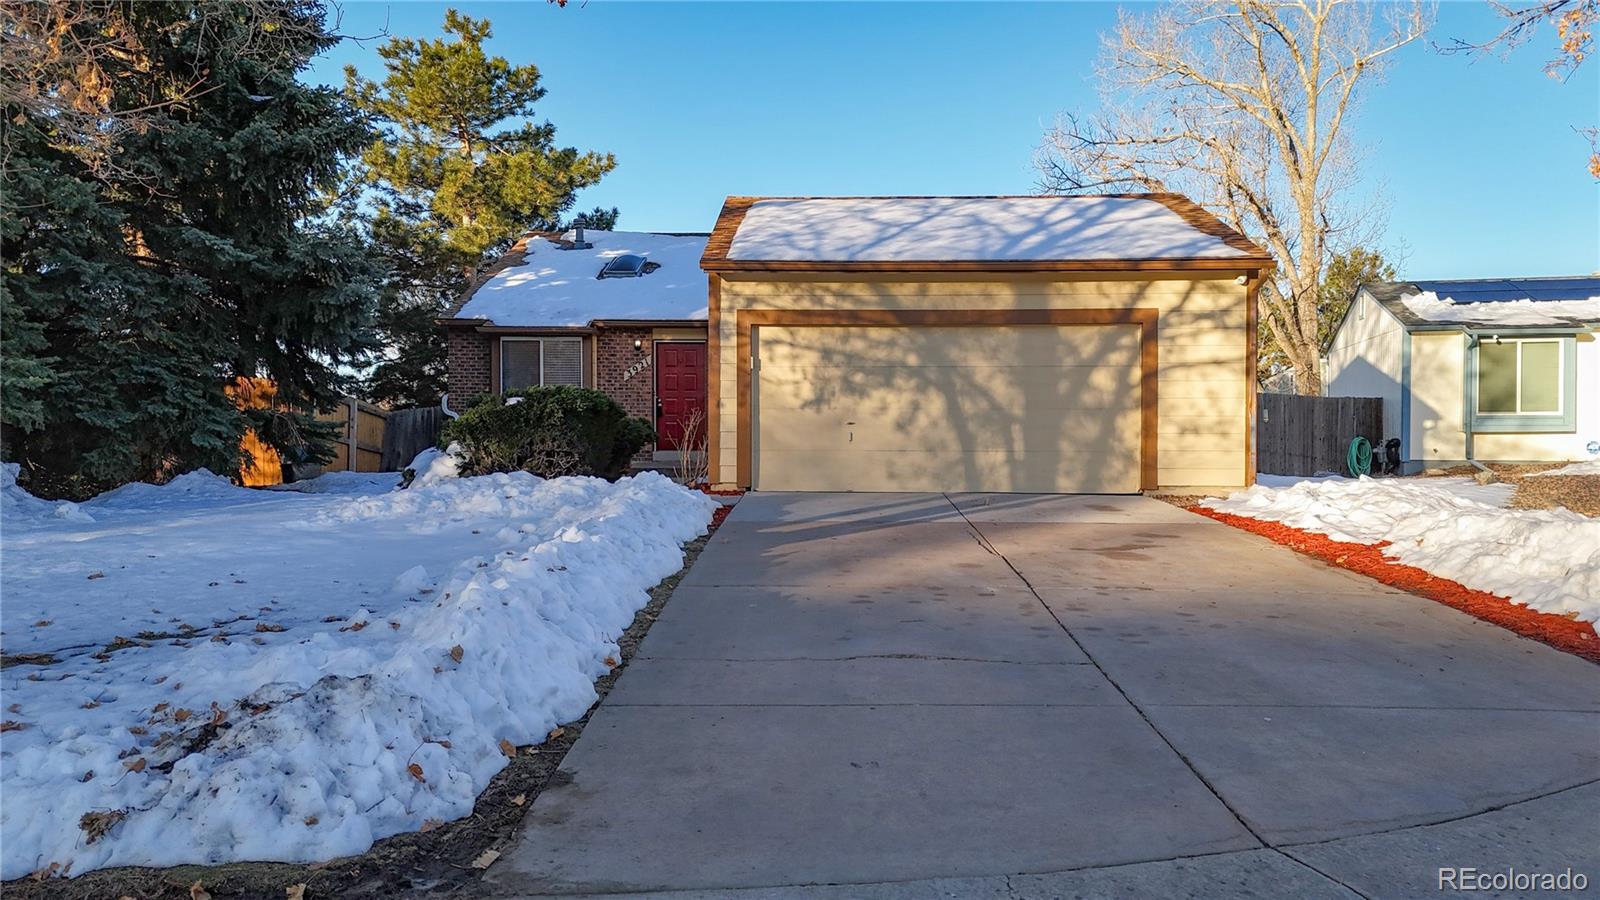 3921 s ensenada court, Aurora sold home. Closed on 2024-04-16 for $475,000.